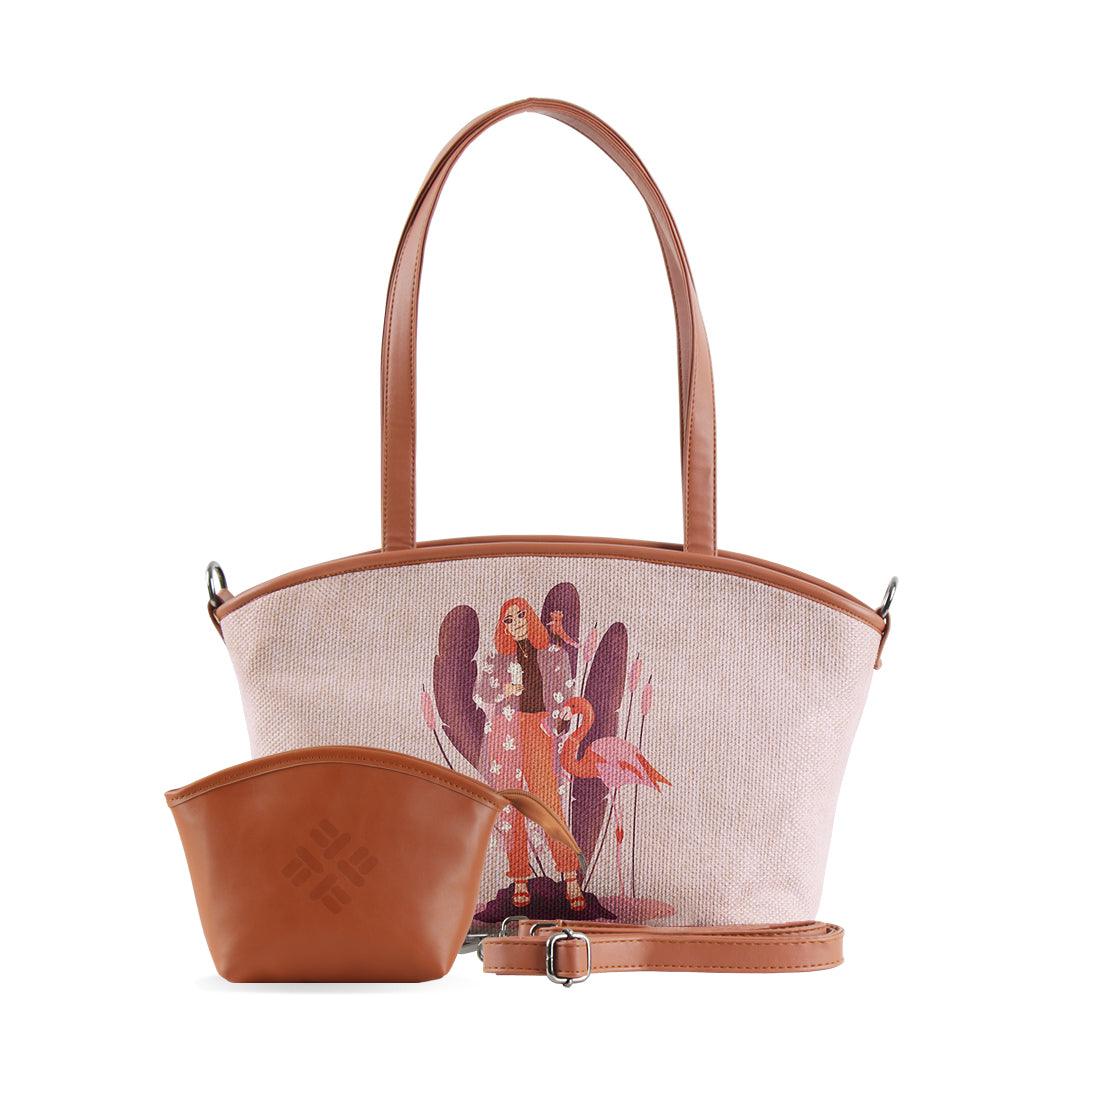 Wide Tote Bag Flamingo is the new pet